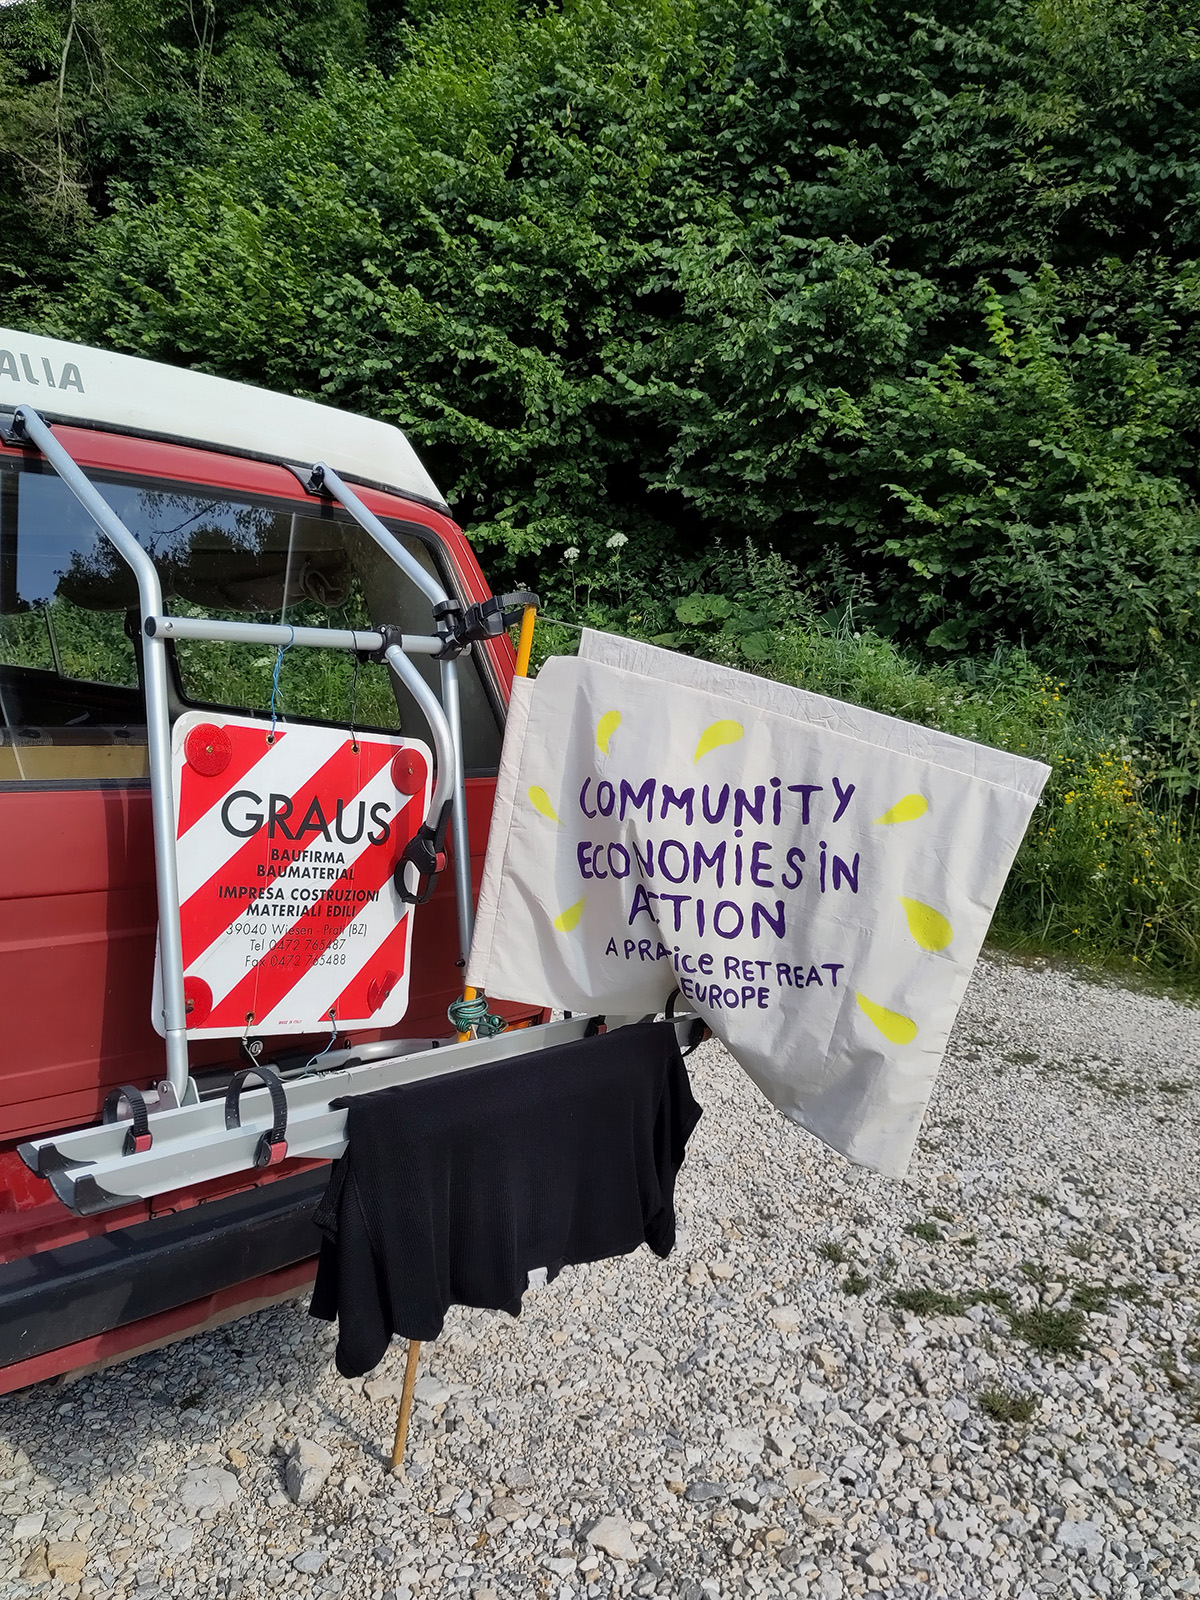 A campervan with a flag hanging off it that says "Community Economies in Action: A Practice Retreat in Europe."